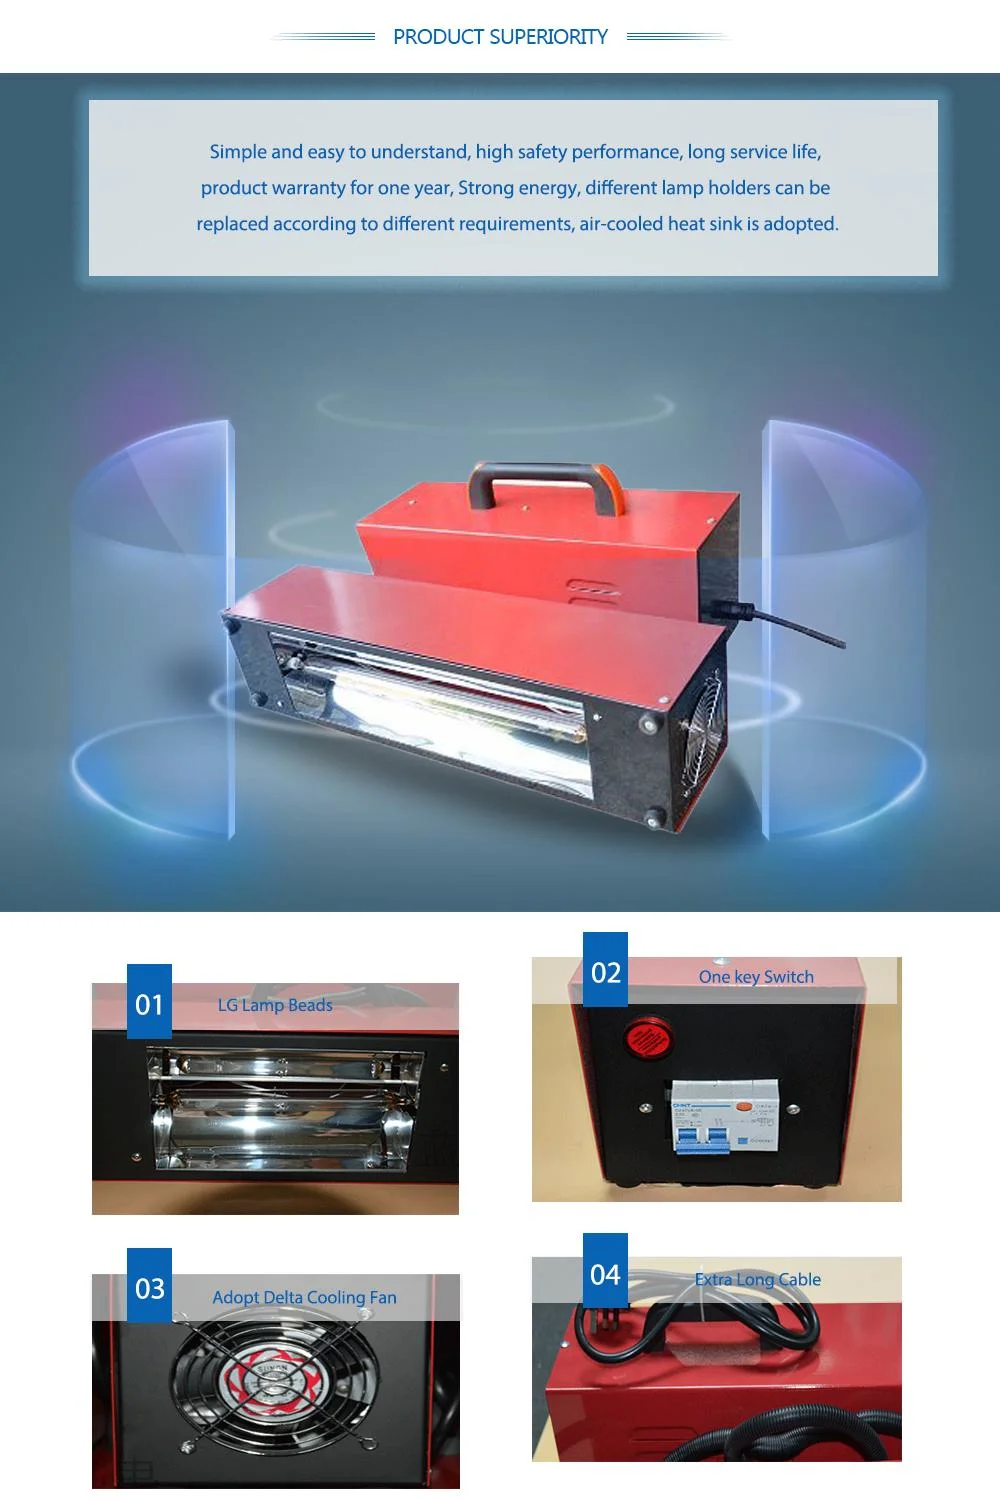 1kw Efficient Portable UV Curing Machine for Product Proofing